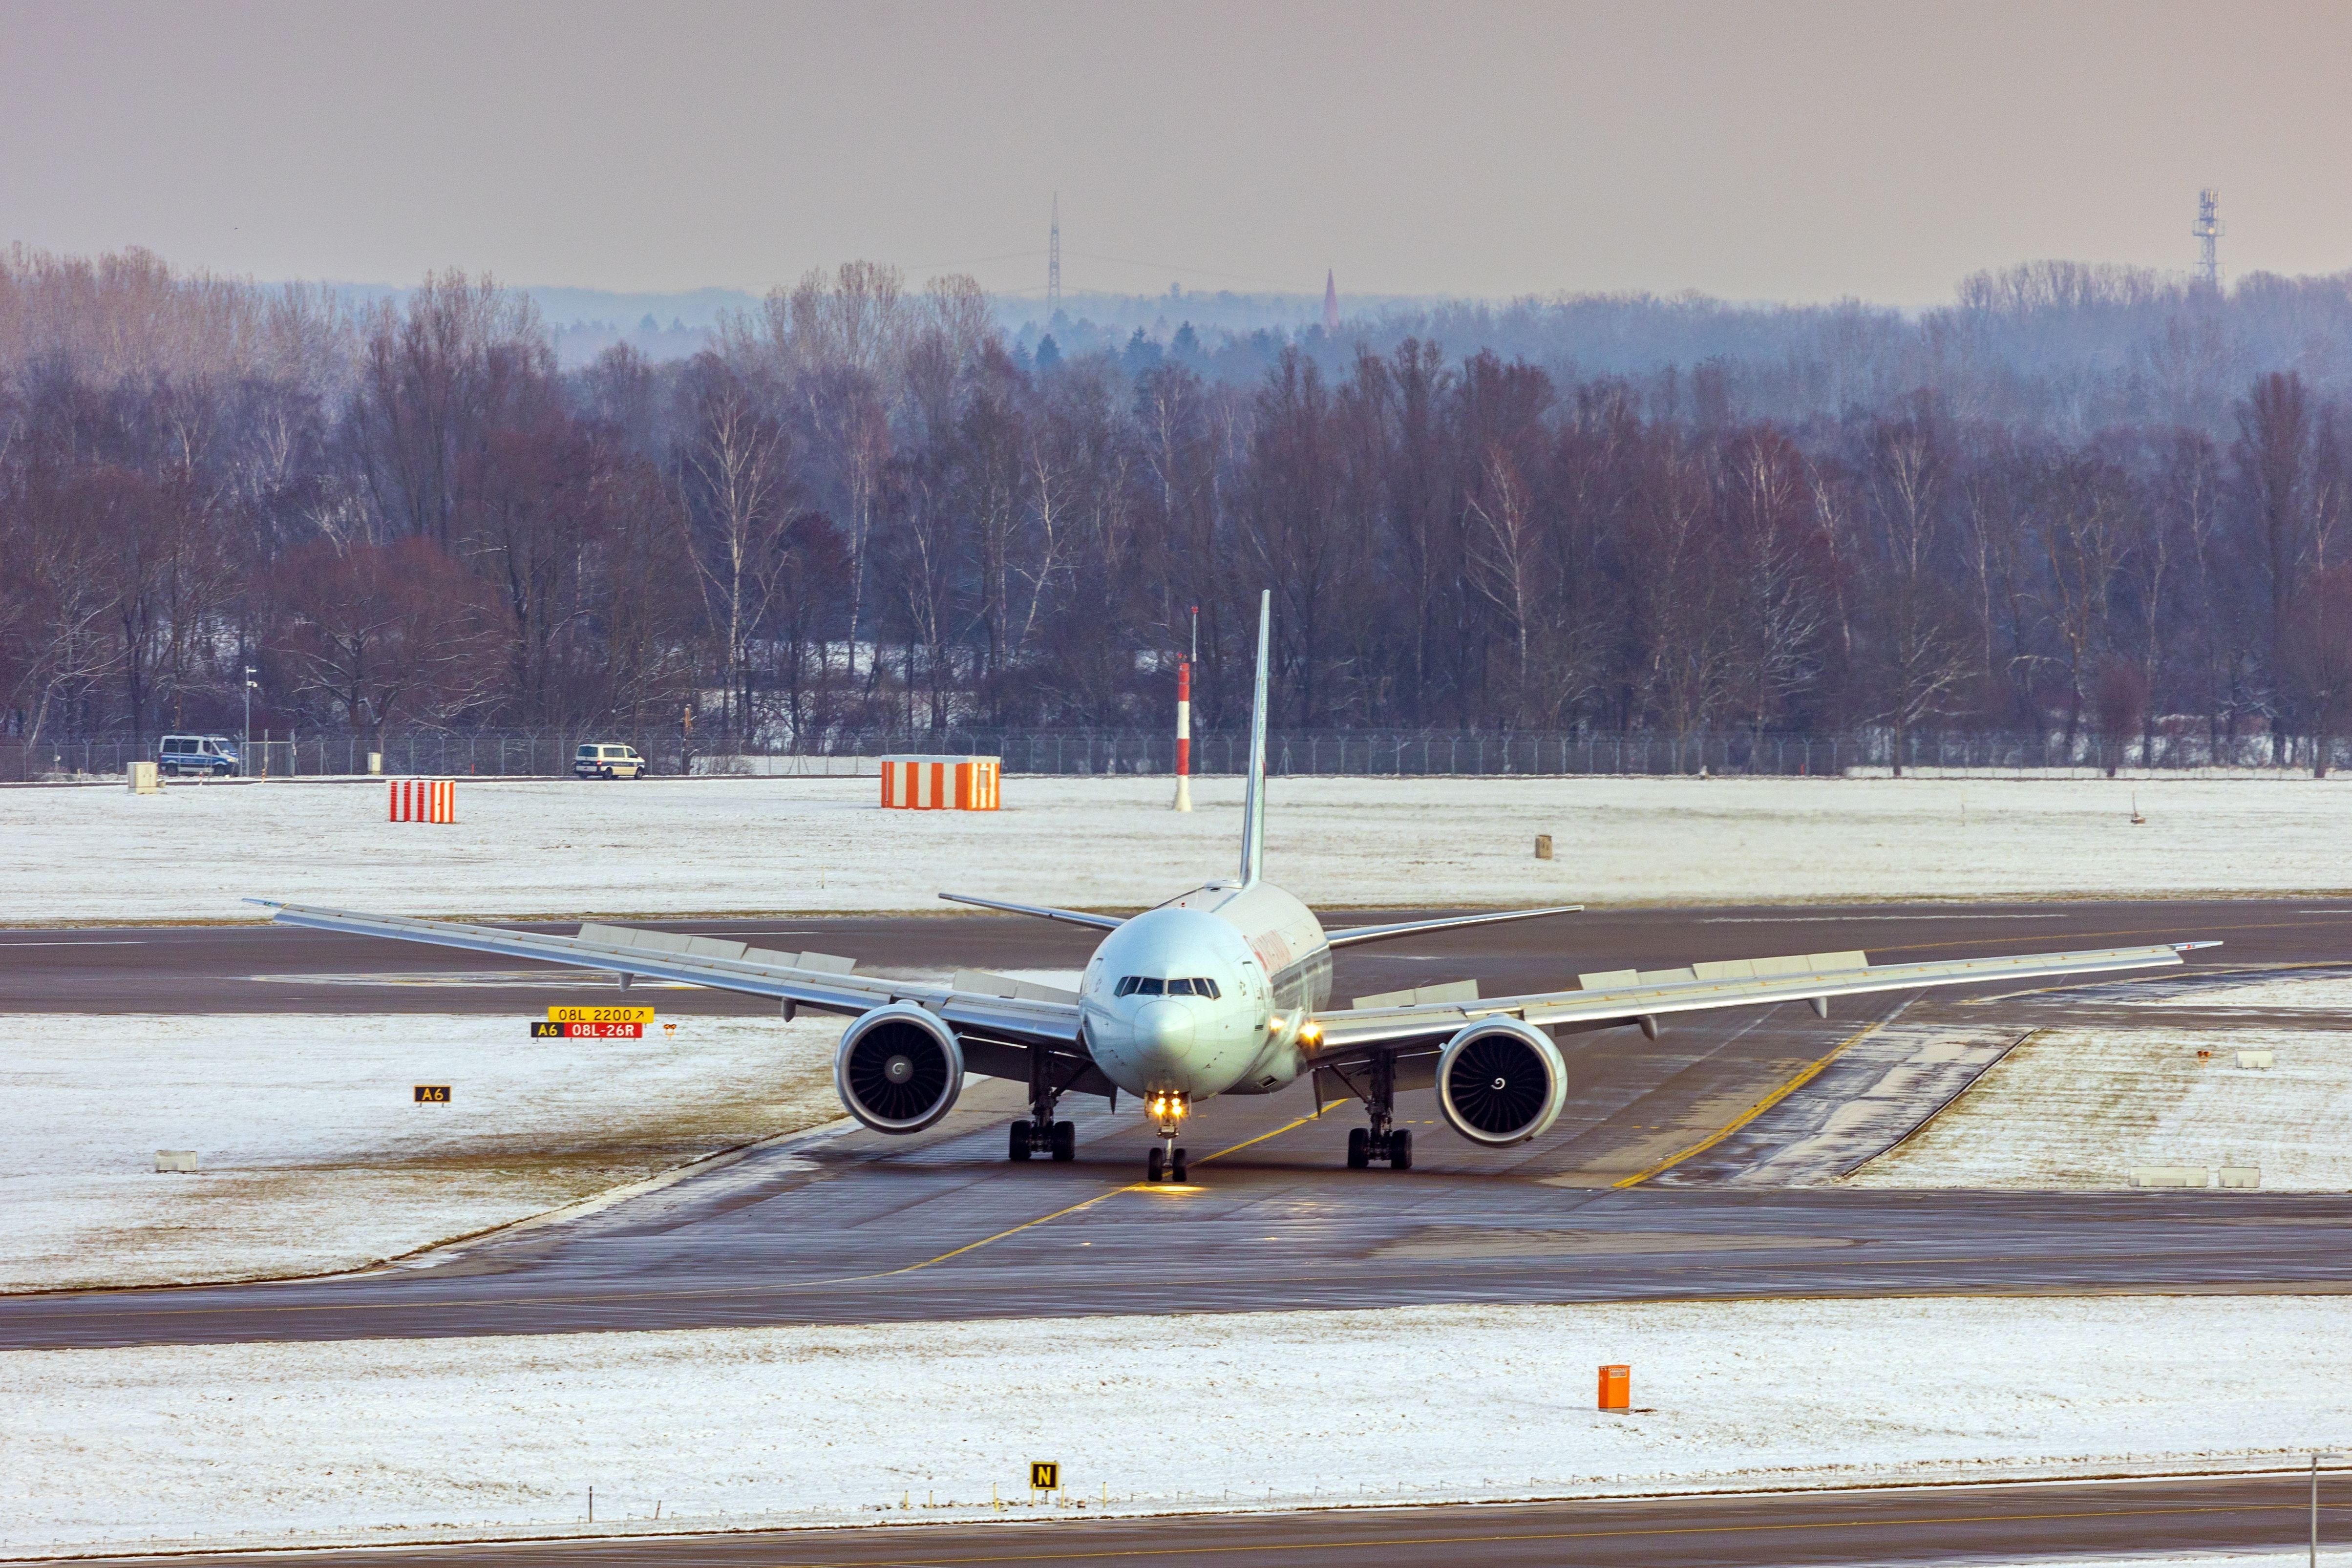 ommercial airplane at Munich airport in Germany, during a cold winter day with snow